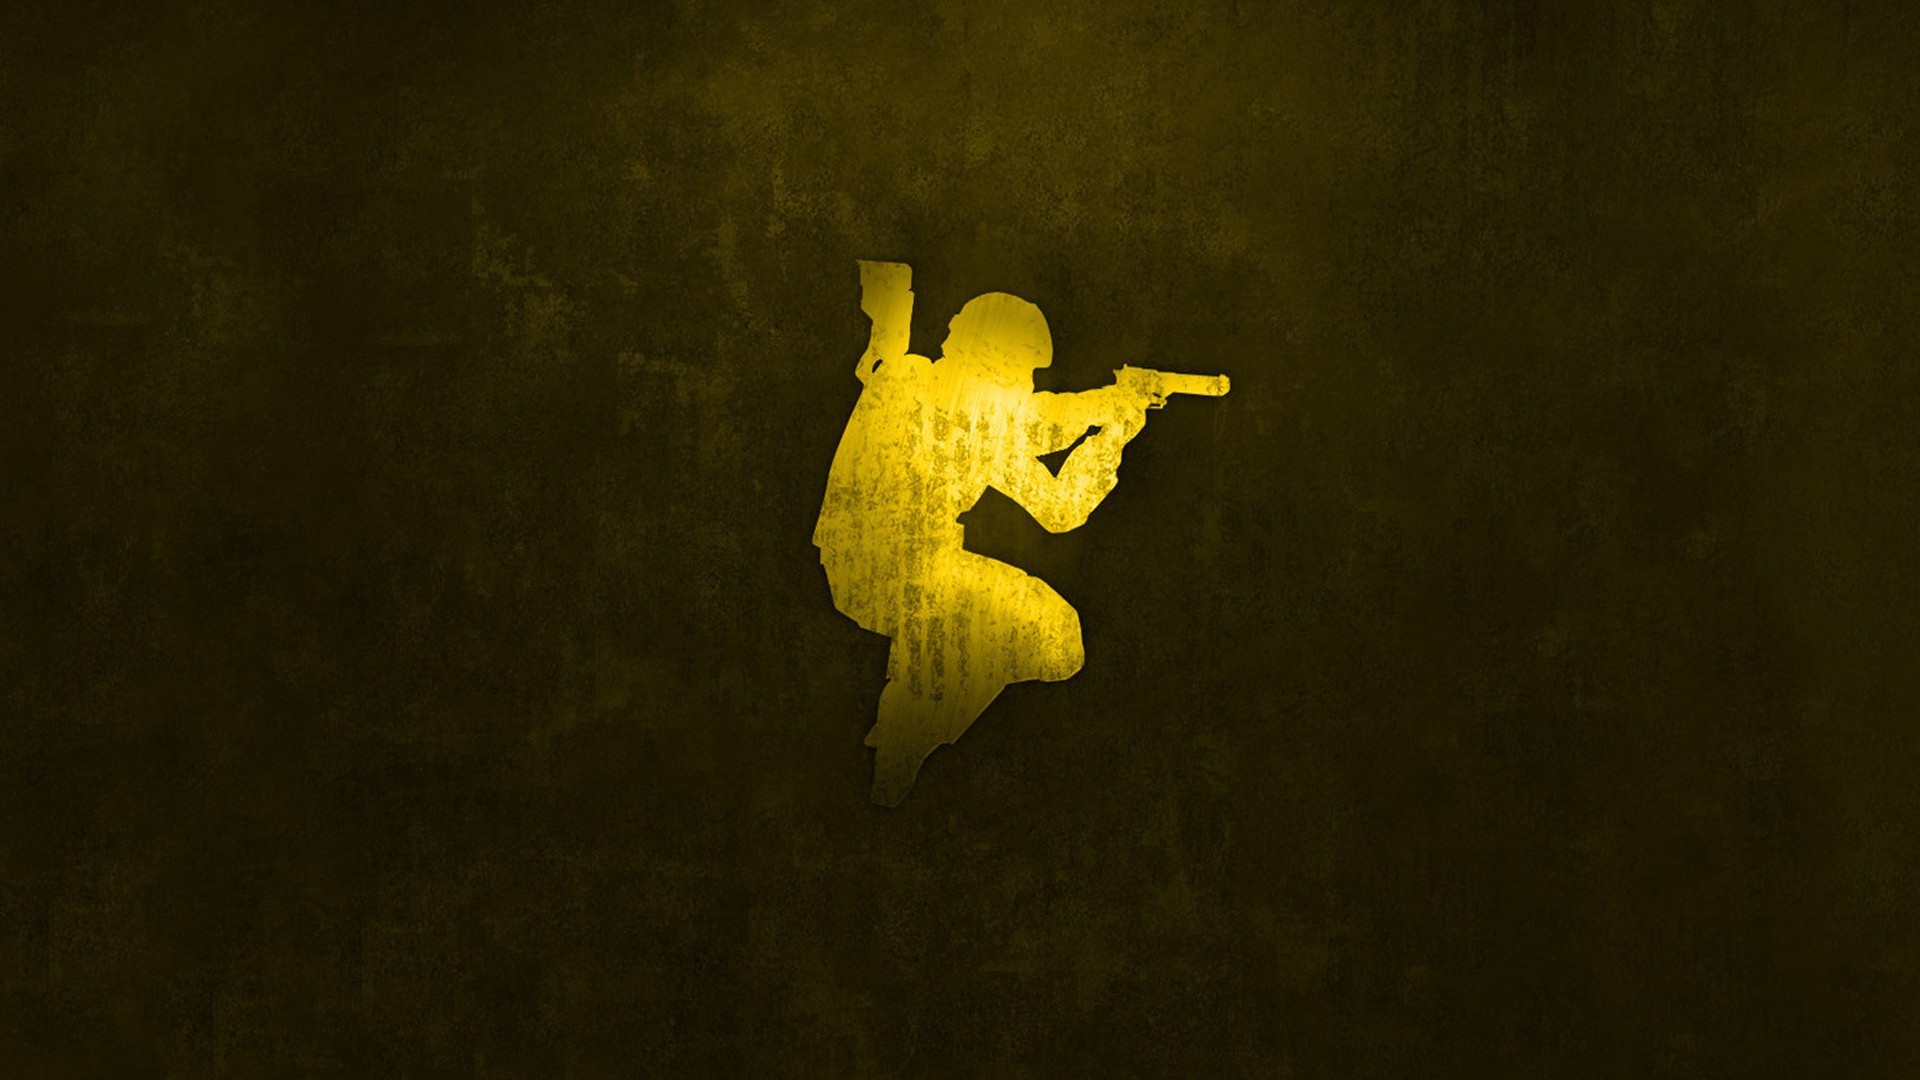 PC Wallpapers games, background, counter strike, black